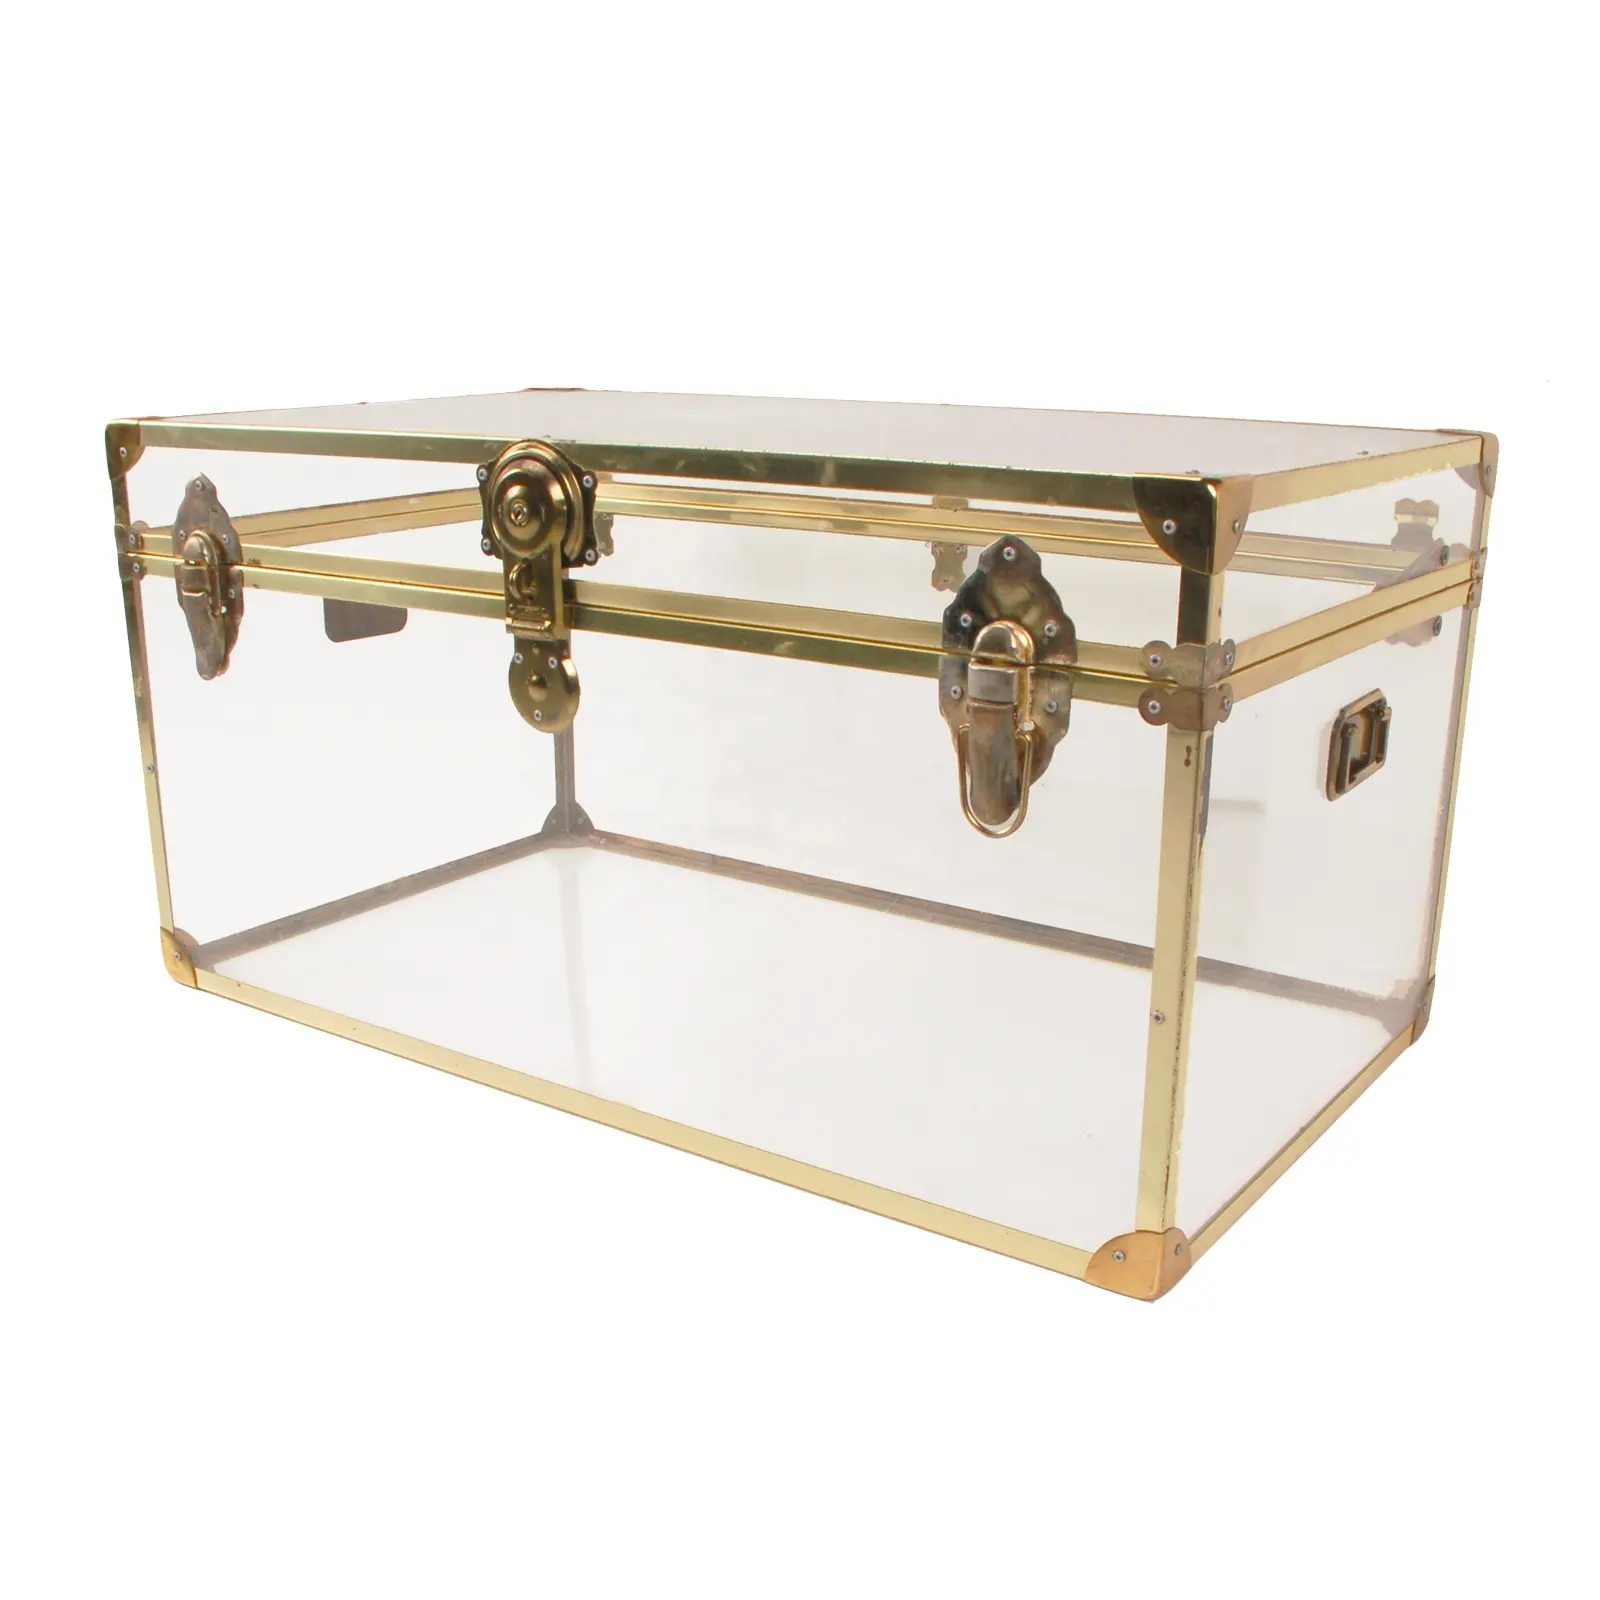 Flat-Top Clear Acrylic Trunk 28 inches Wide x 18 inches deep x 16 inches high copper colored Hardware